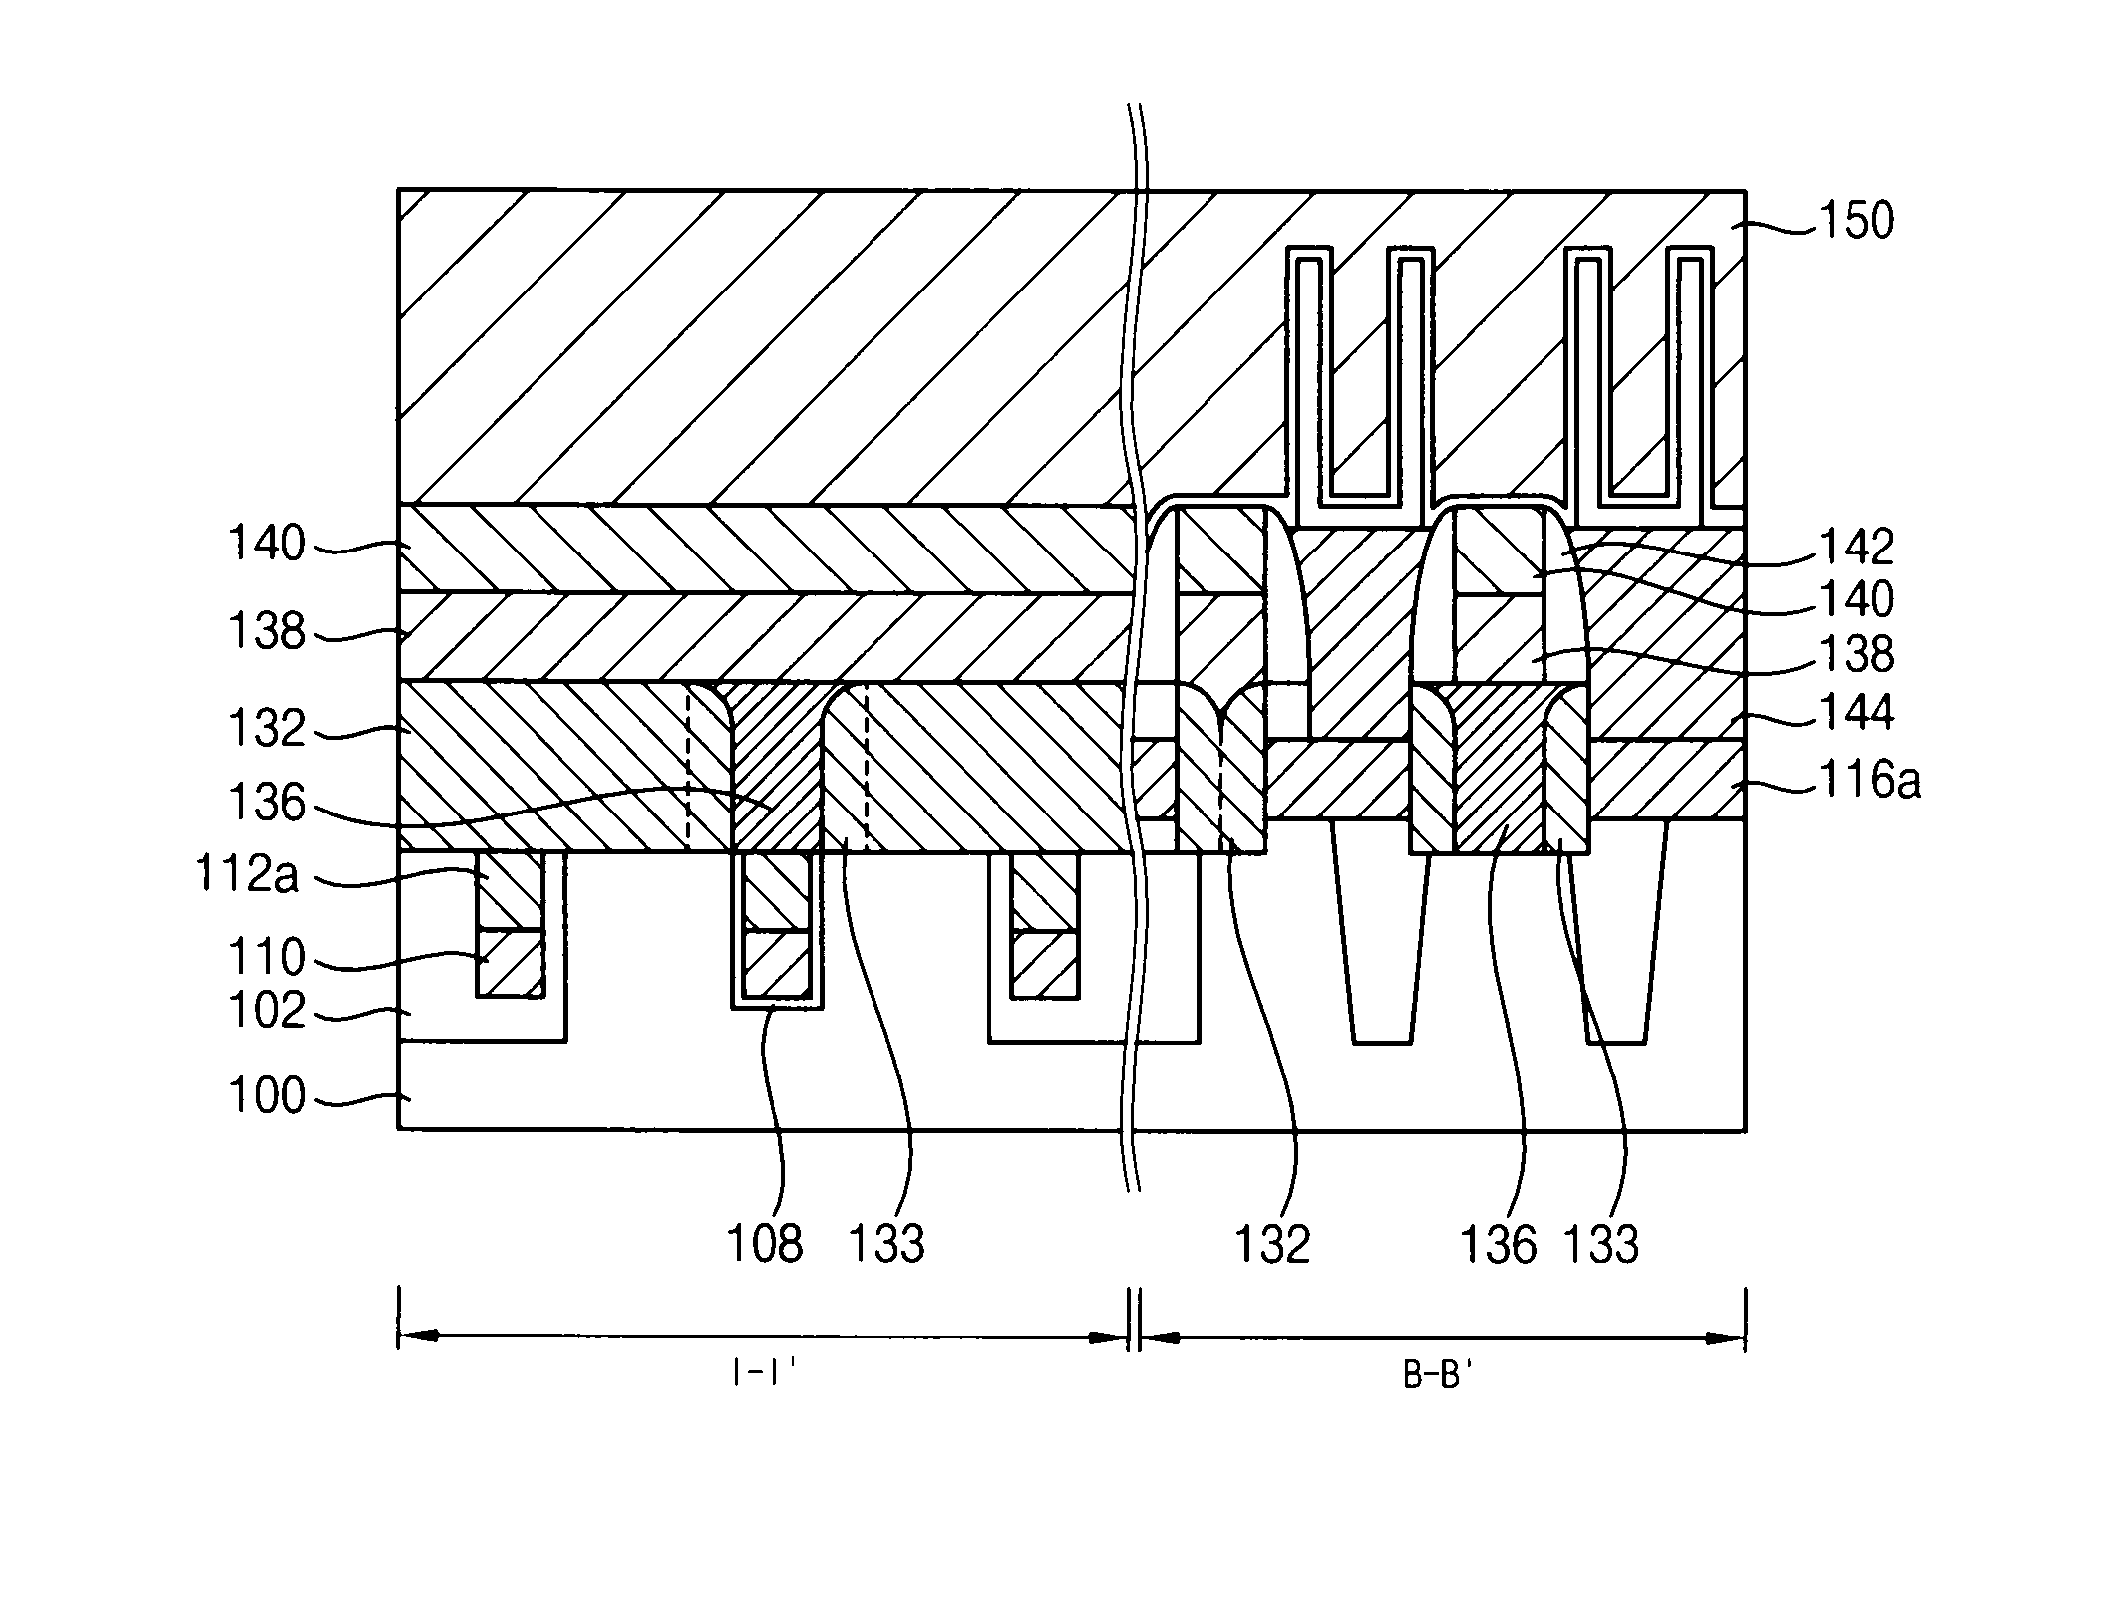 Methods of manufacturing a DRAM device